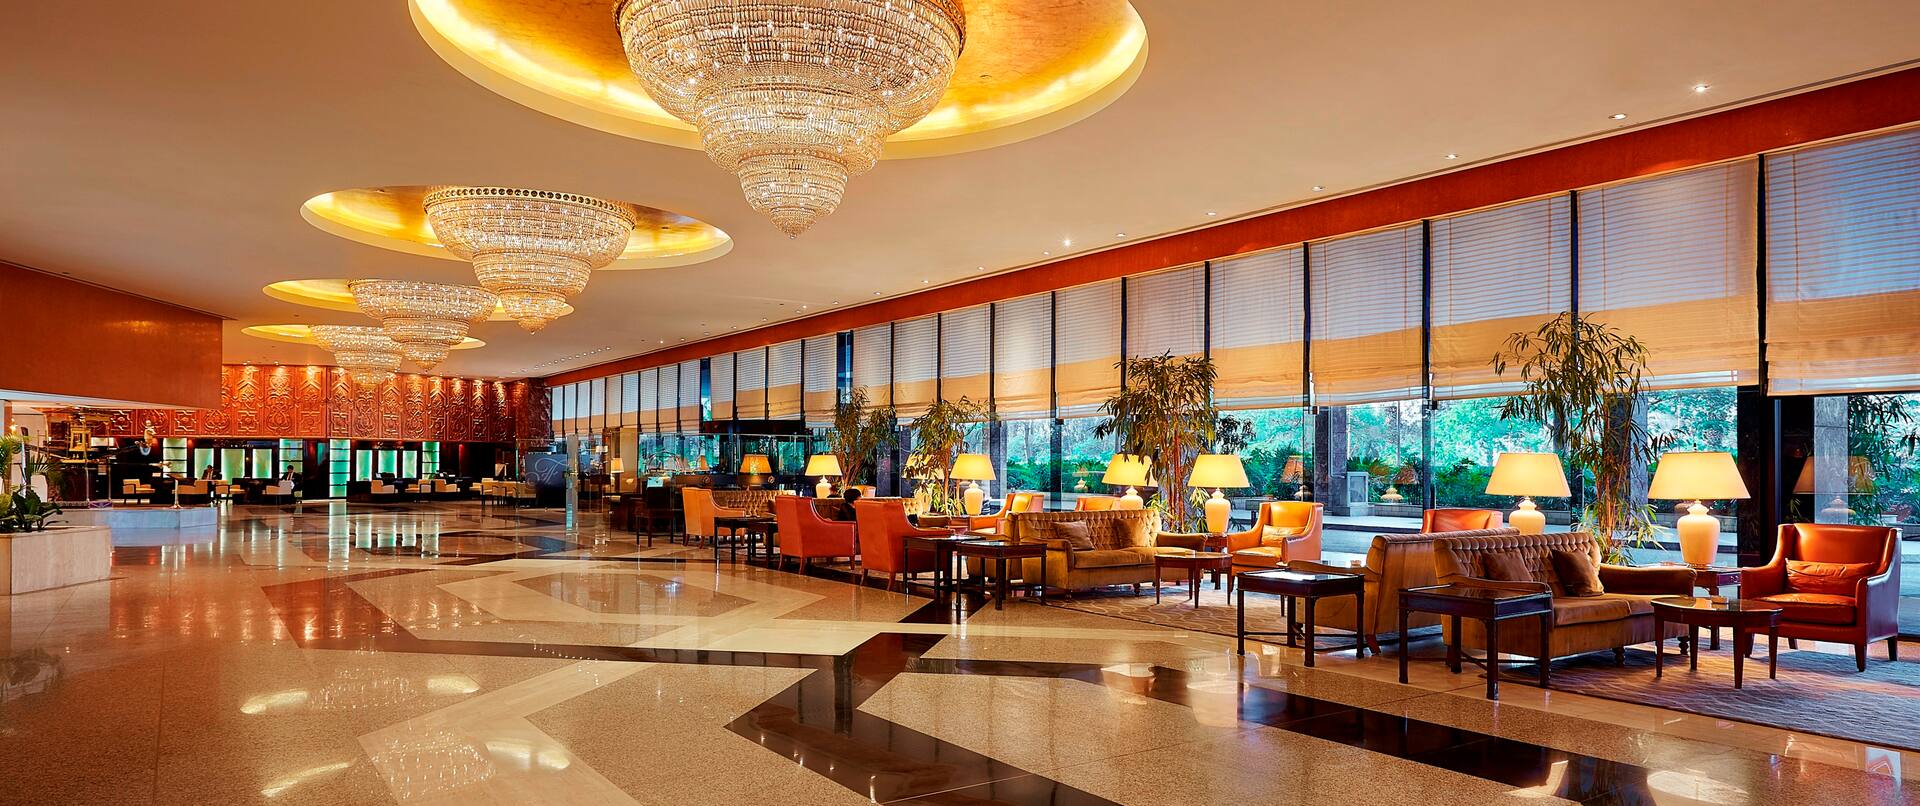 Hotel lobby with sofas, soft chairs, coffee tables, and floor-to-ceiling windows with outdoor view